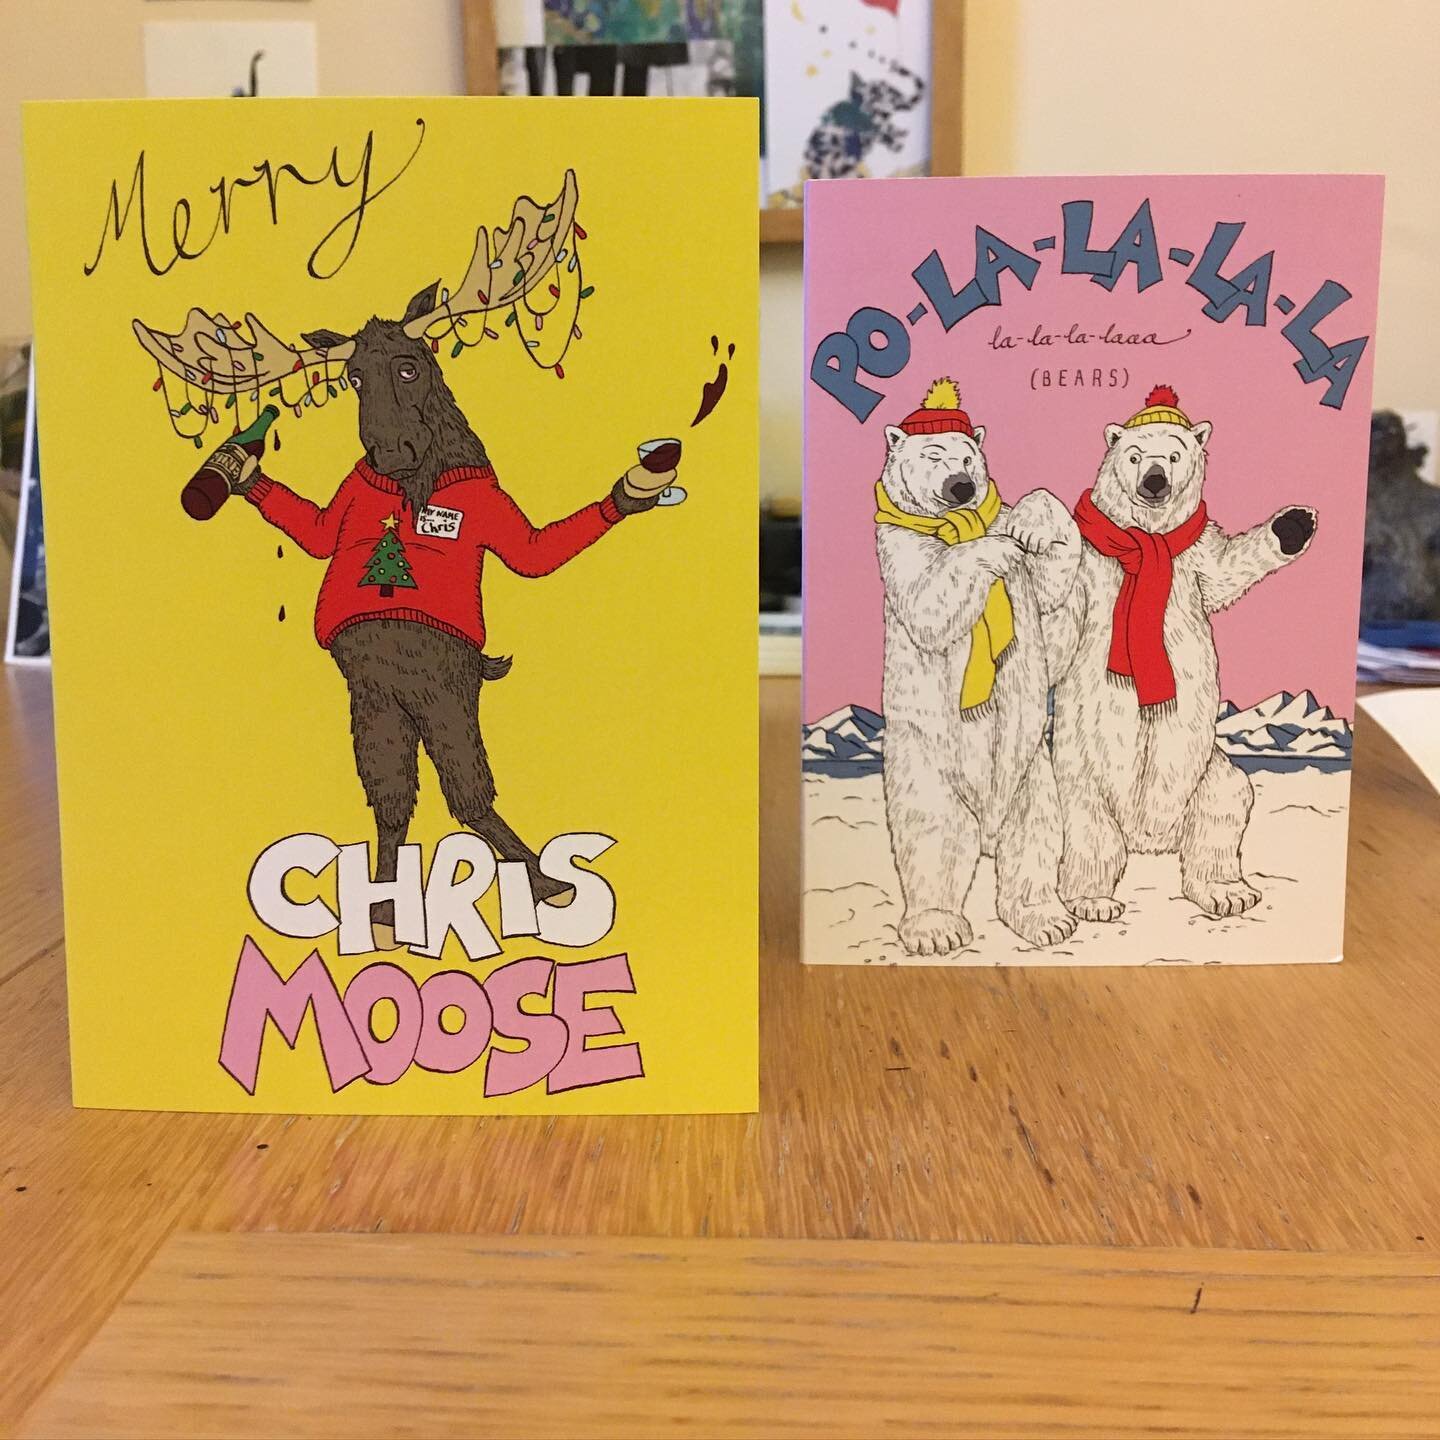 Lads! Christmas cards are back in stock! Now available in packs of 10, so for the first time this year you can choose MORE THAN SIX FRIENDS!! Get em while they&rsquo;re hot (or just, y&rsquo;know, before Christmas).